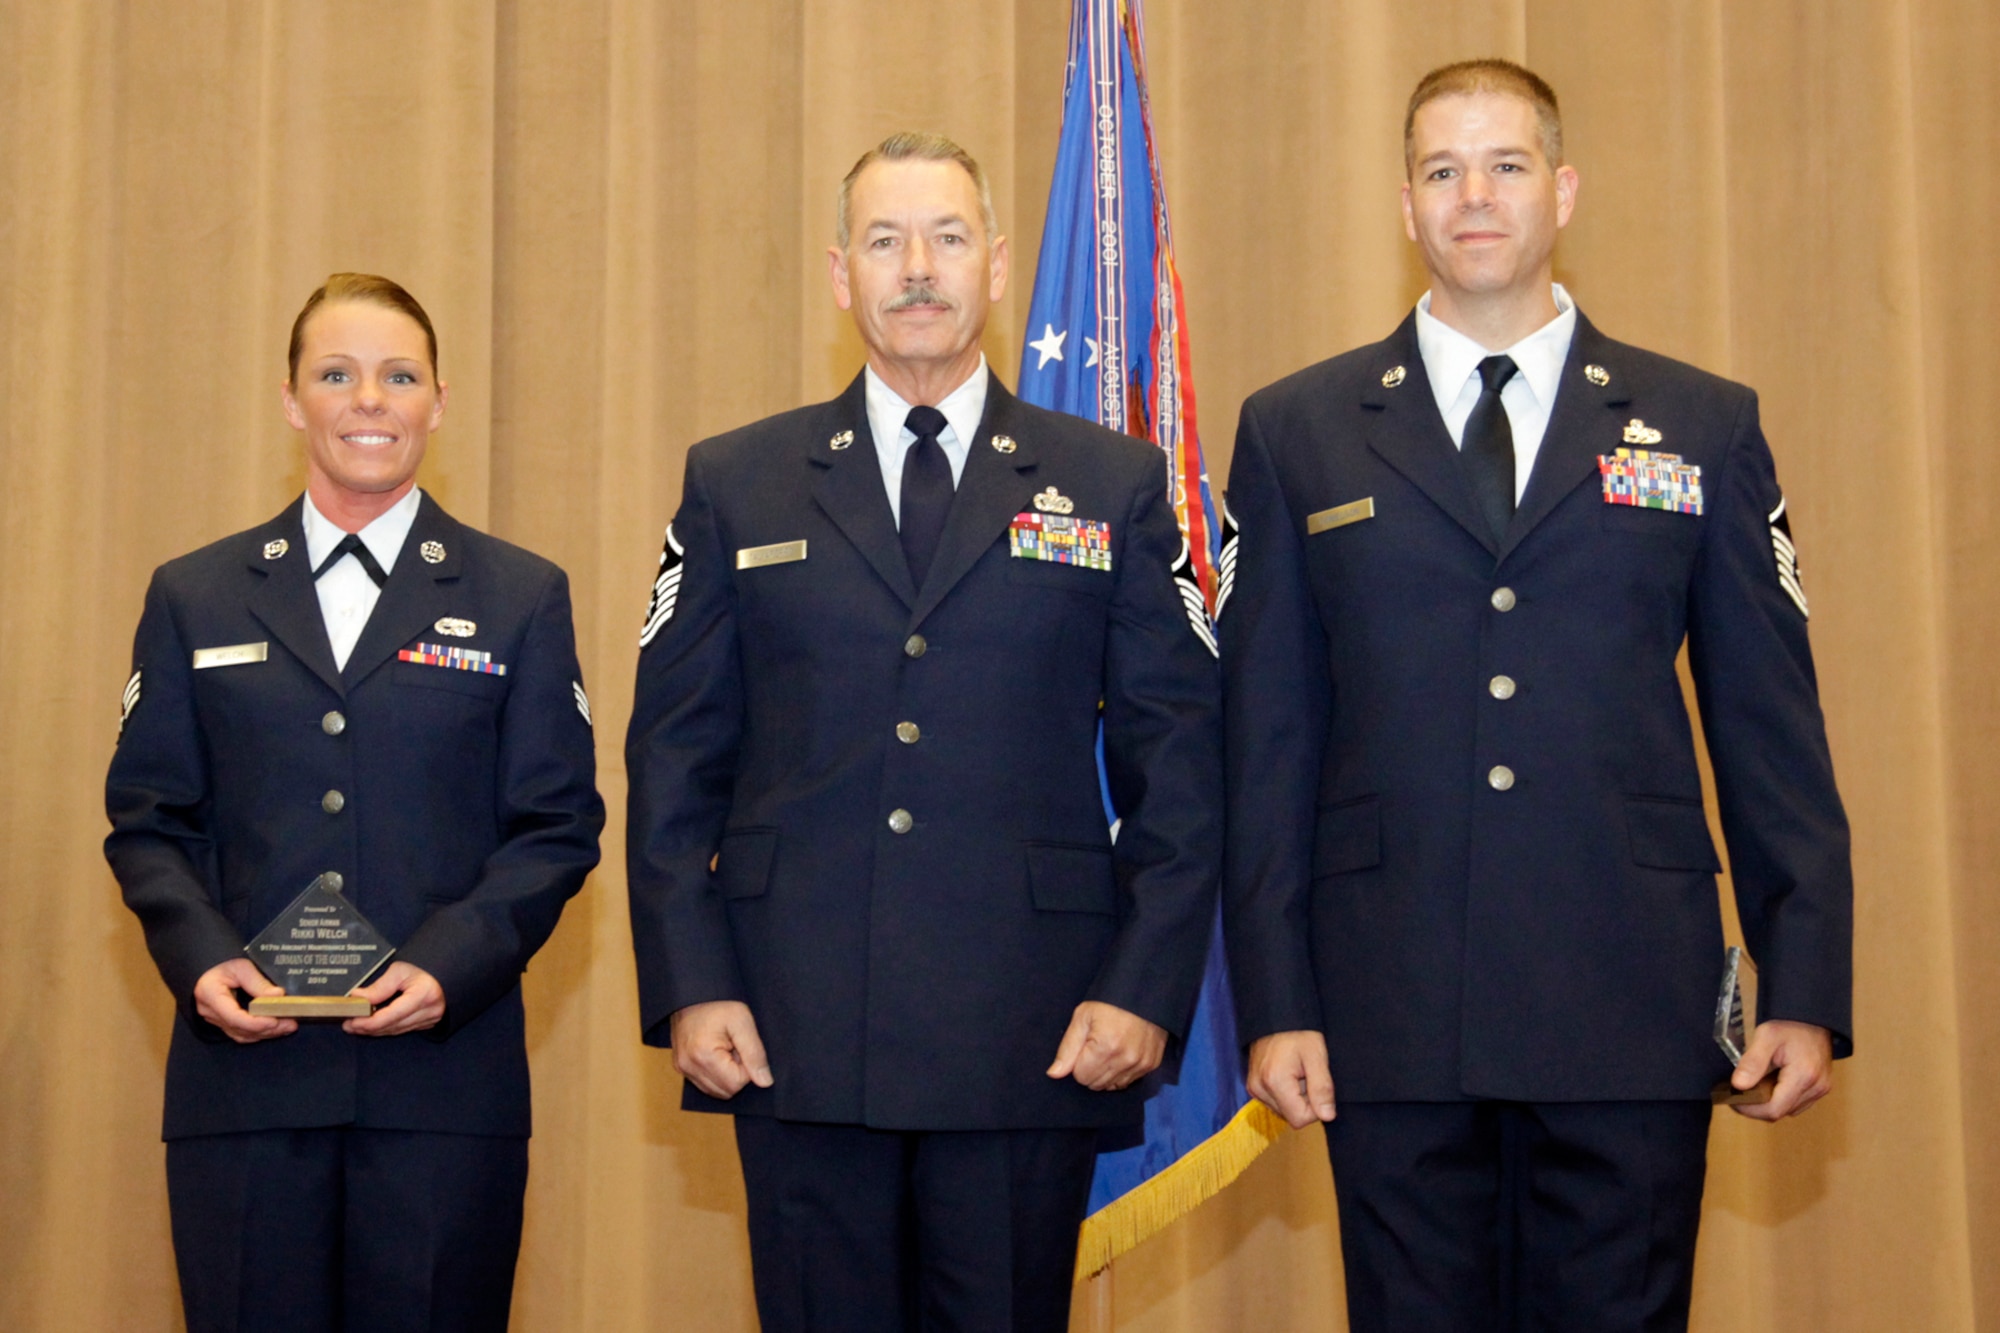 Master Sgt. James Taliaferro, a First Sergeant’s Association representative, poses between the 917th Wing Airman and Non-Commissioned Officer of the Quarter winners for the Third Quarter of 2010, during award ceremonies at the 917th Wing Commander’s Call in Hoban Hall at Barksdale Air Force Base, La., Dec. 5, 2010. Sergeant Taliaferro presented the “Diamond Sharp Award” to Senior Airman Rikki Welch, armament systems mechanic, and Master Sgt. John Donelson, electronic warfare systems mechanic, who are both assigned to the 917th Maintenance Squadron.  (U.S. Air Force photo /Staff Sgt. Travis Robertson)